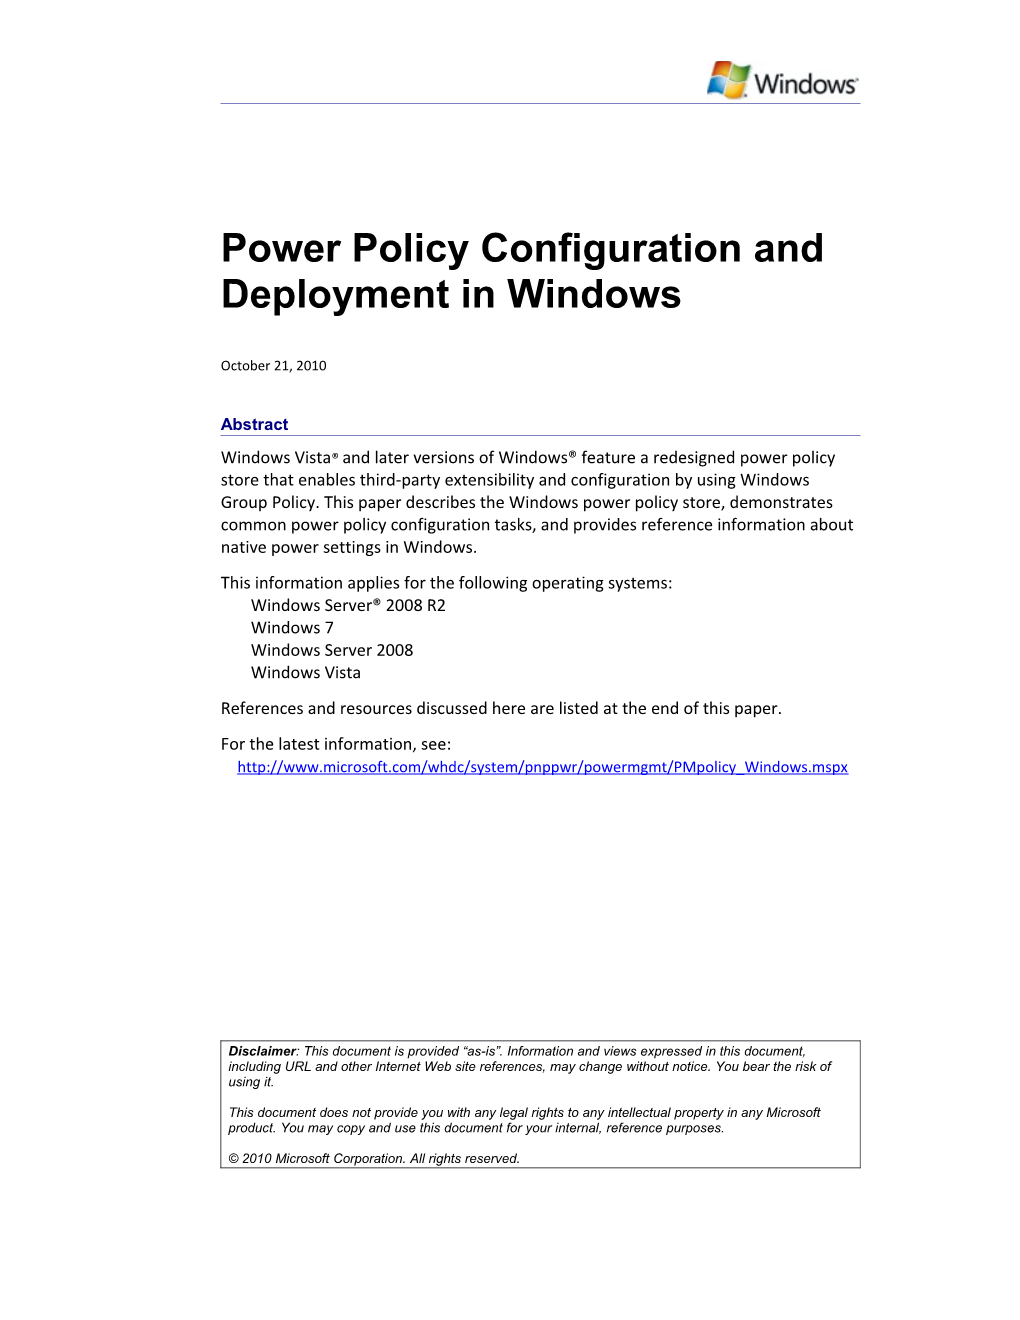 Power Policy Configuration and Deployment in Windows - 2